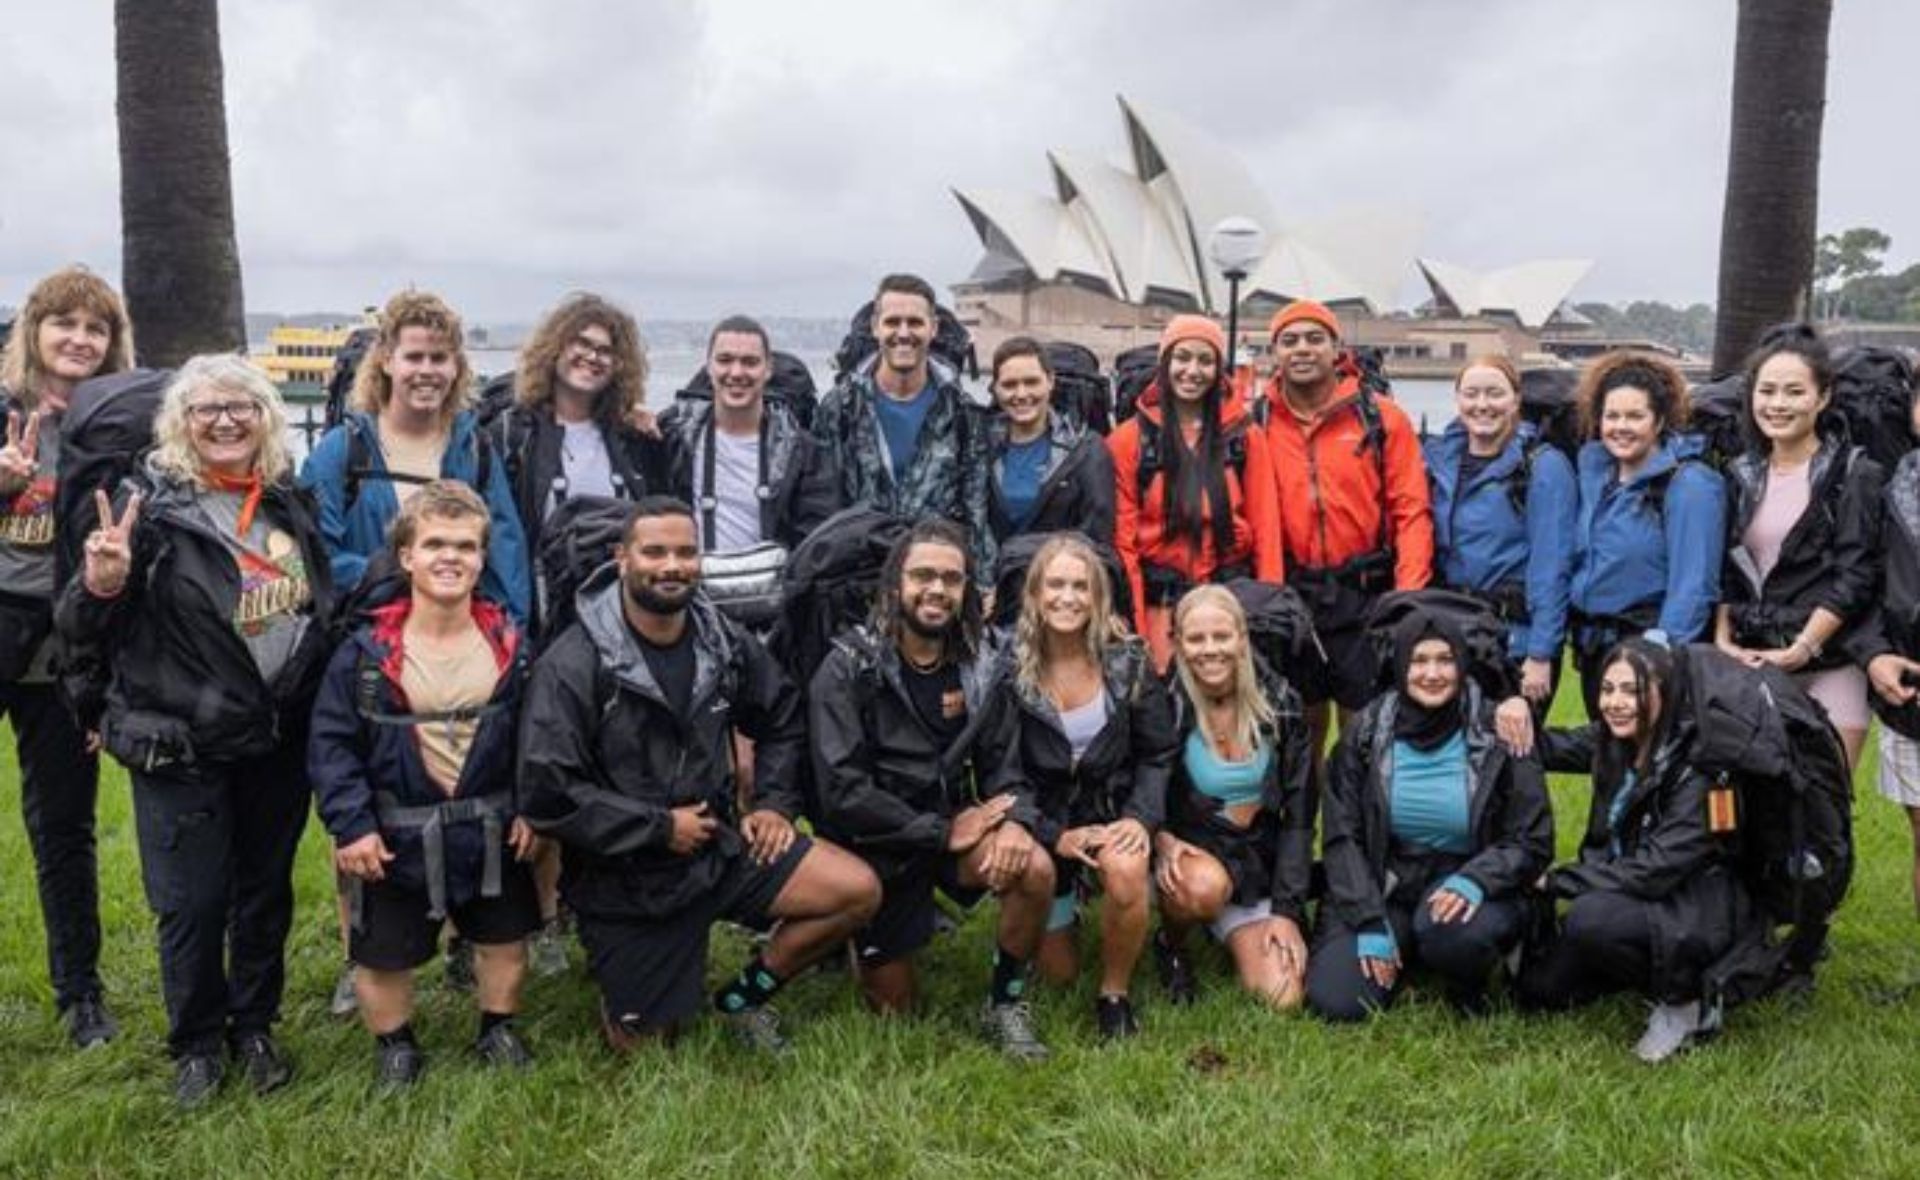 Meet the contestants competing in The Amazing Race Australia in 2022